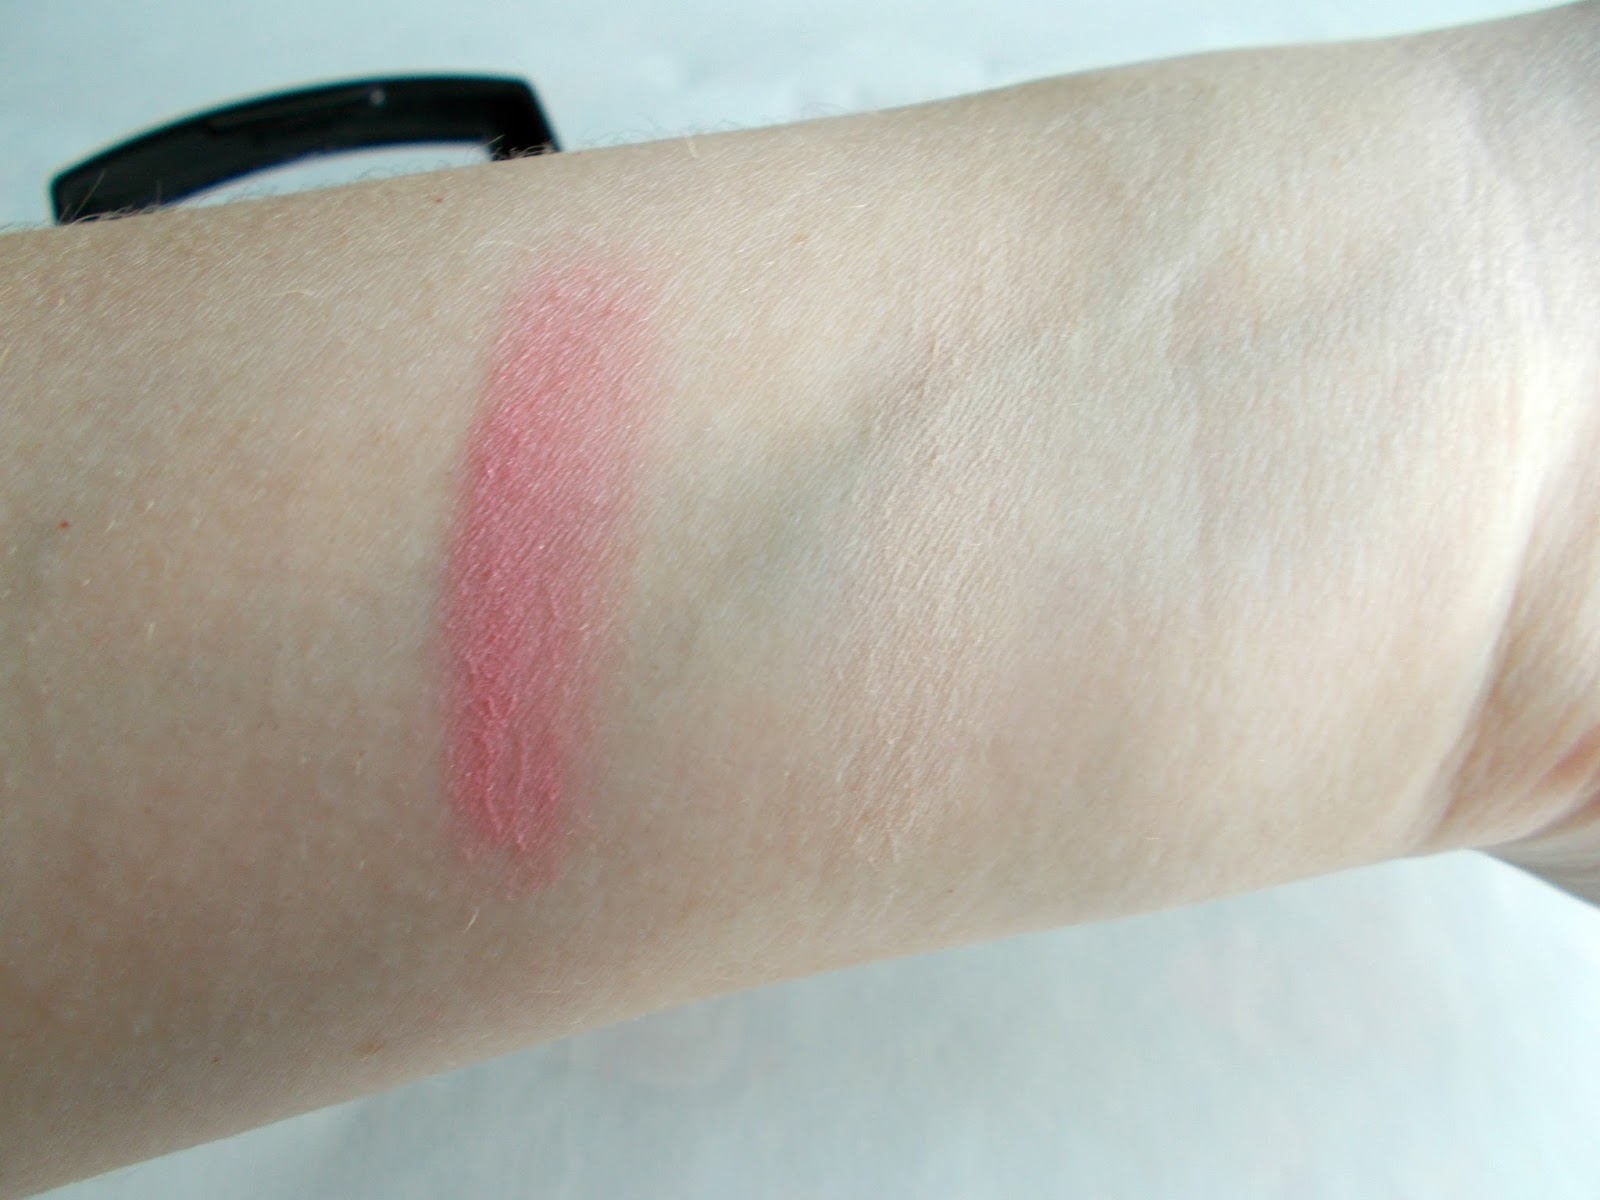 SEVENTEEN stay time powder fair blush china pink swatch review